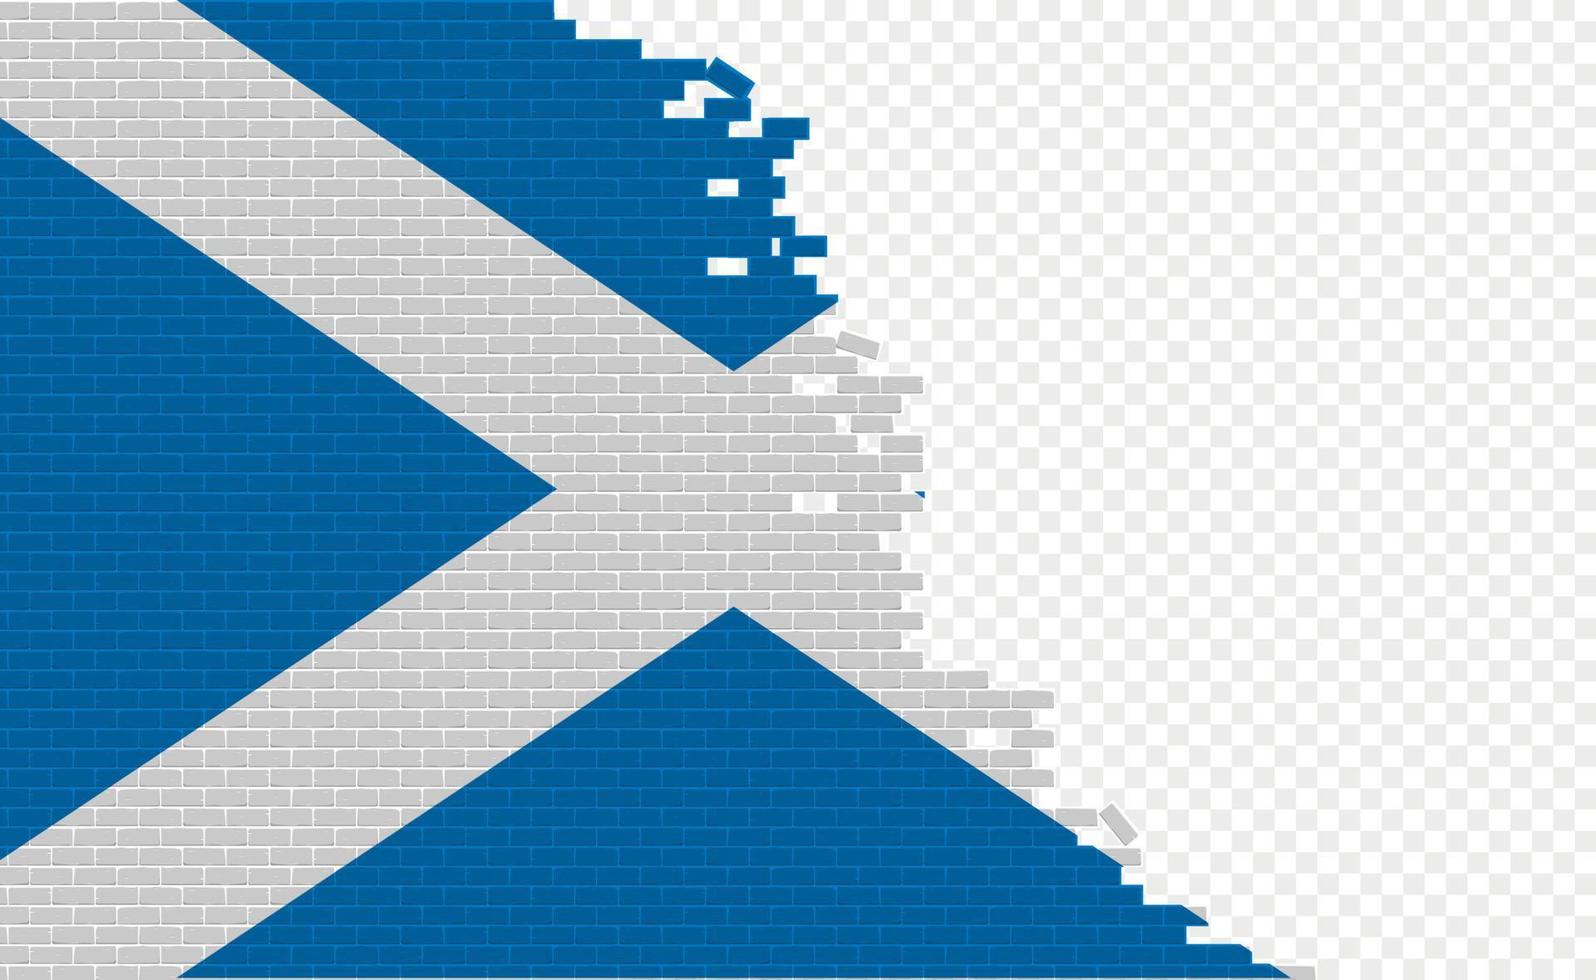 Scotland flag on broken brick wall. Empty flag field of another country. Country comparison. Easy editing and vector in groups.